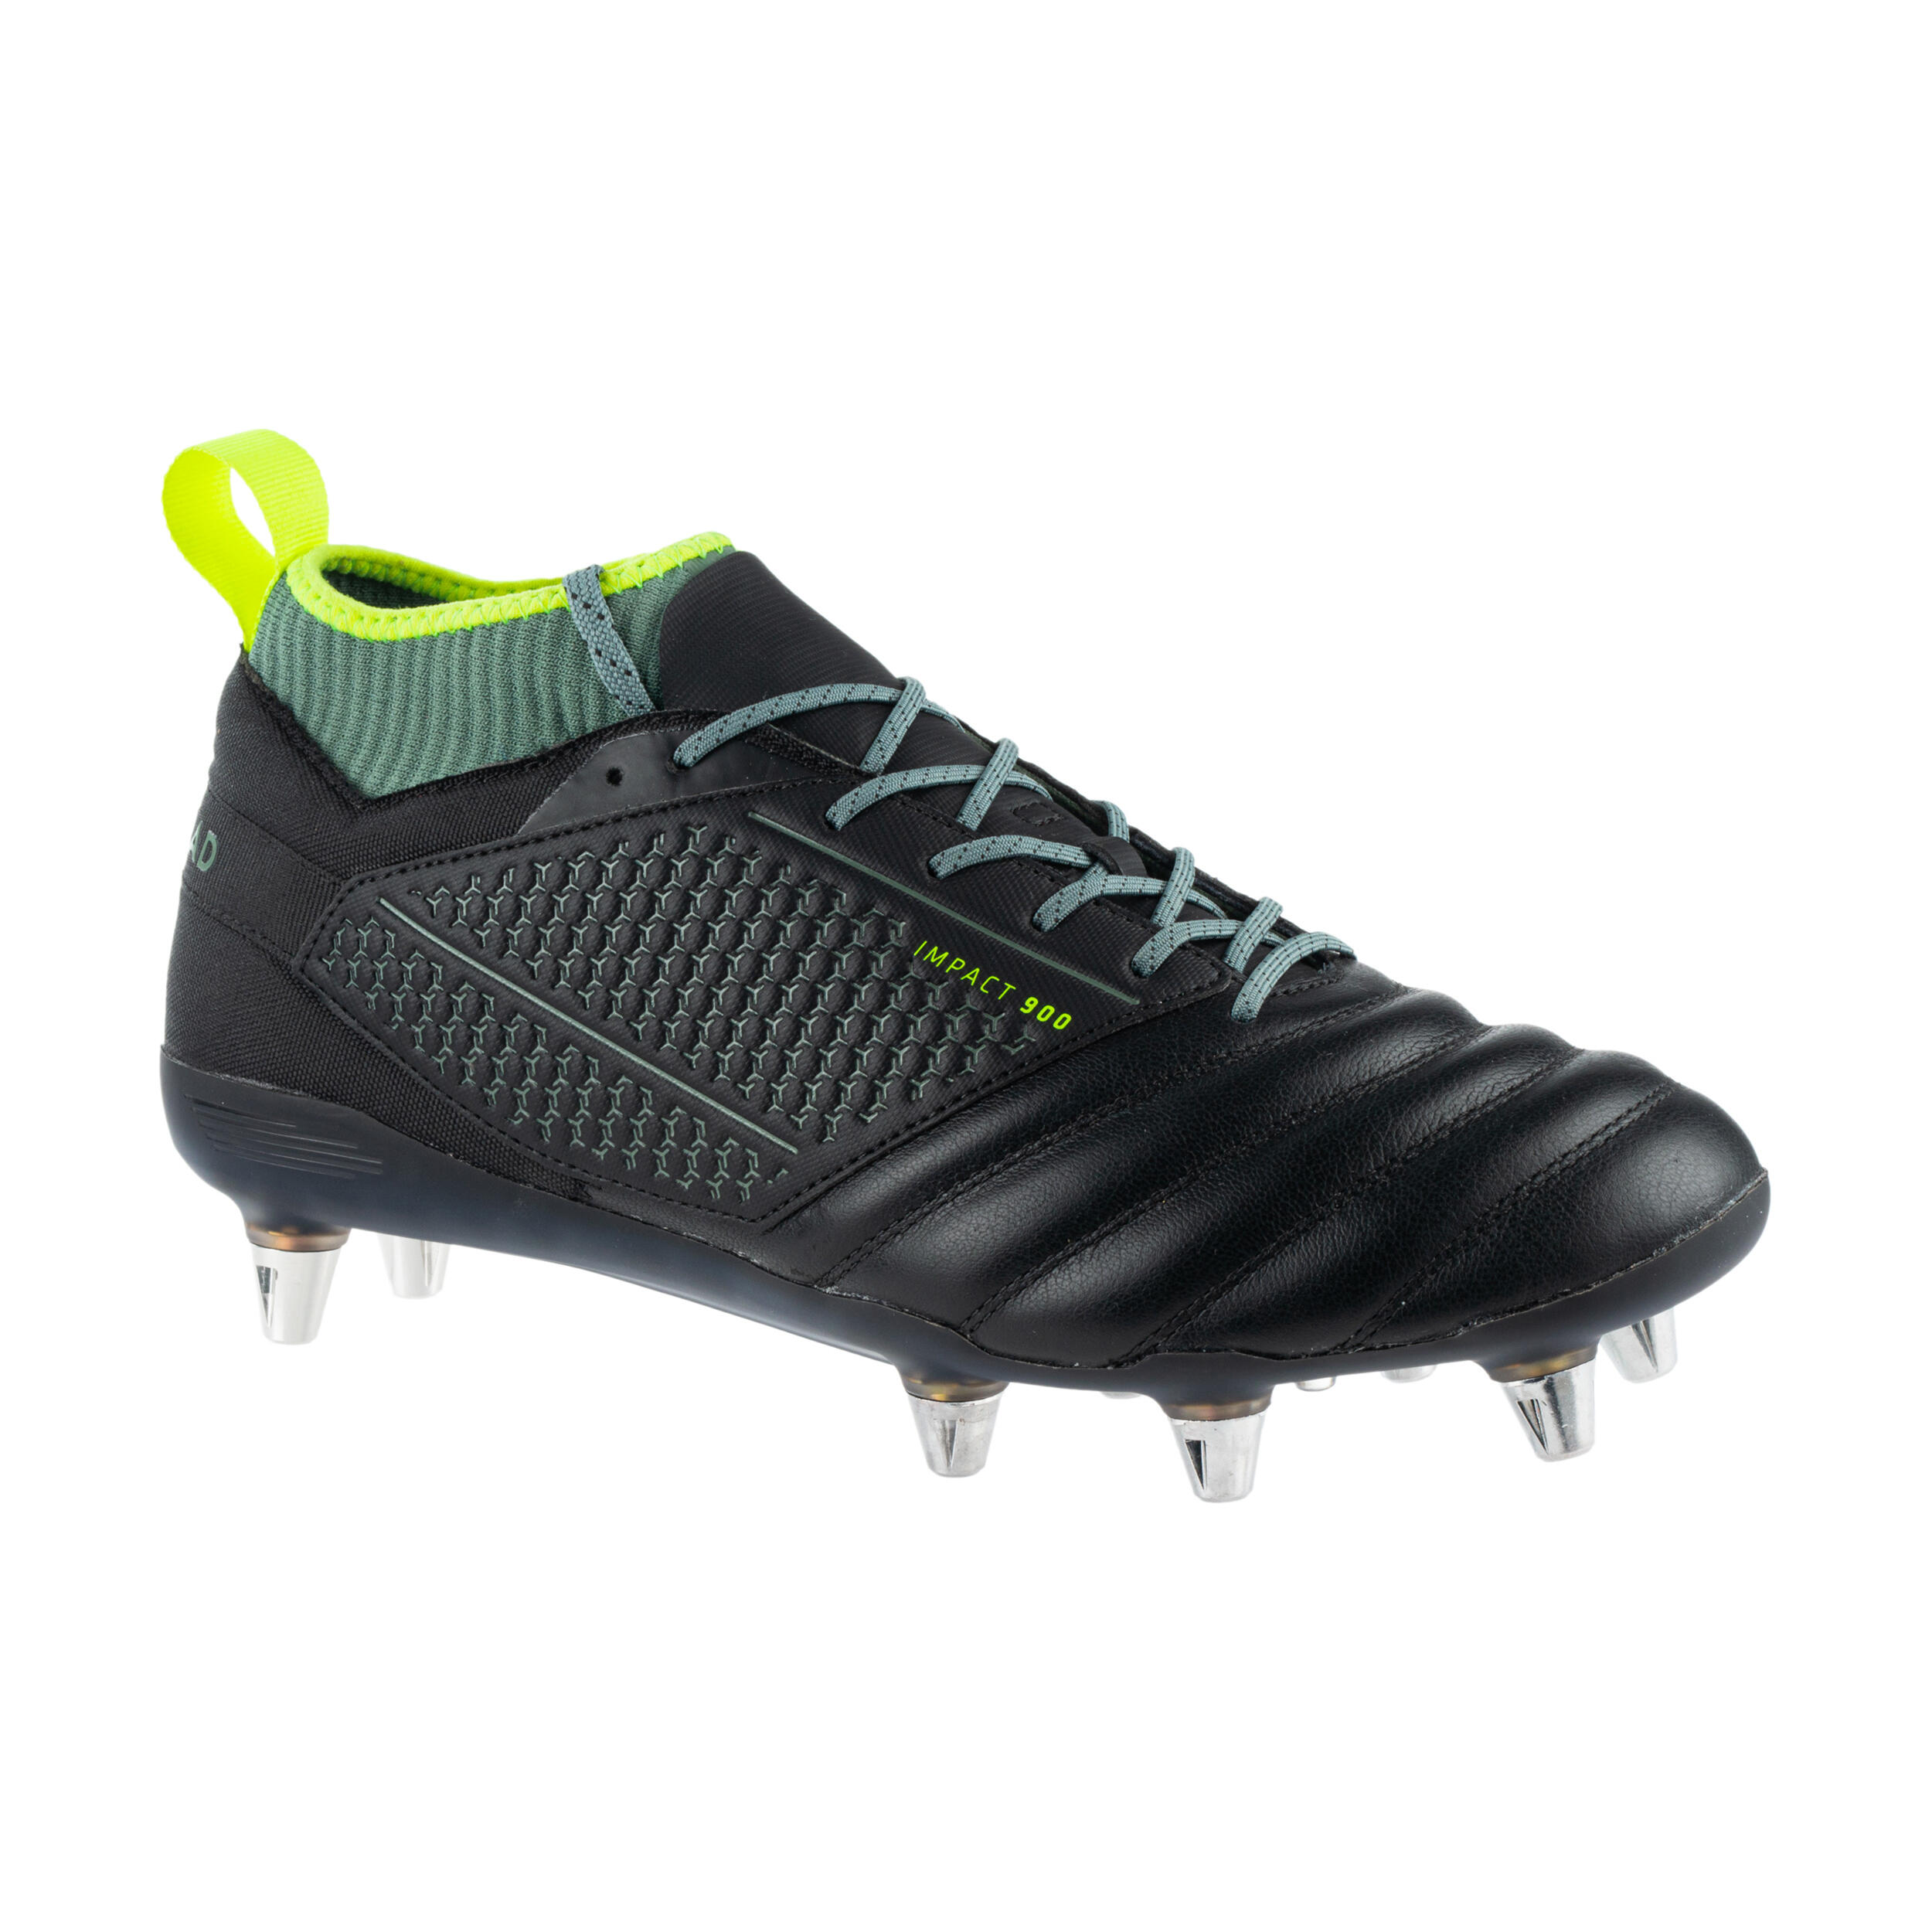 rugby boots uk